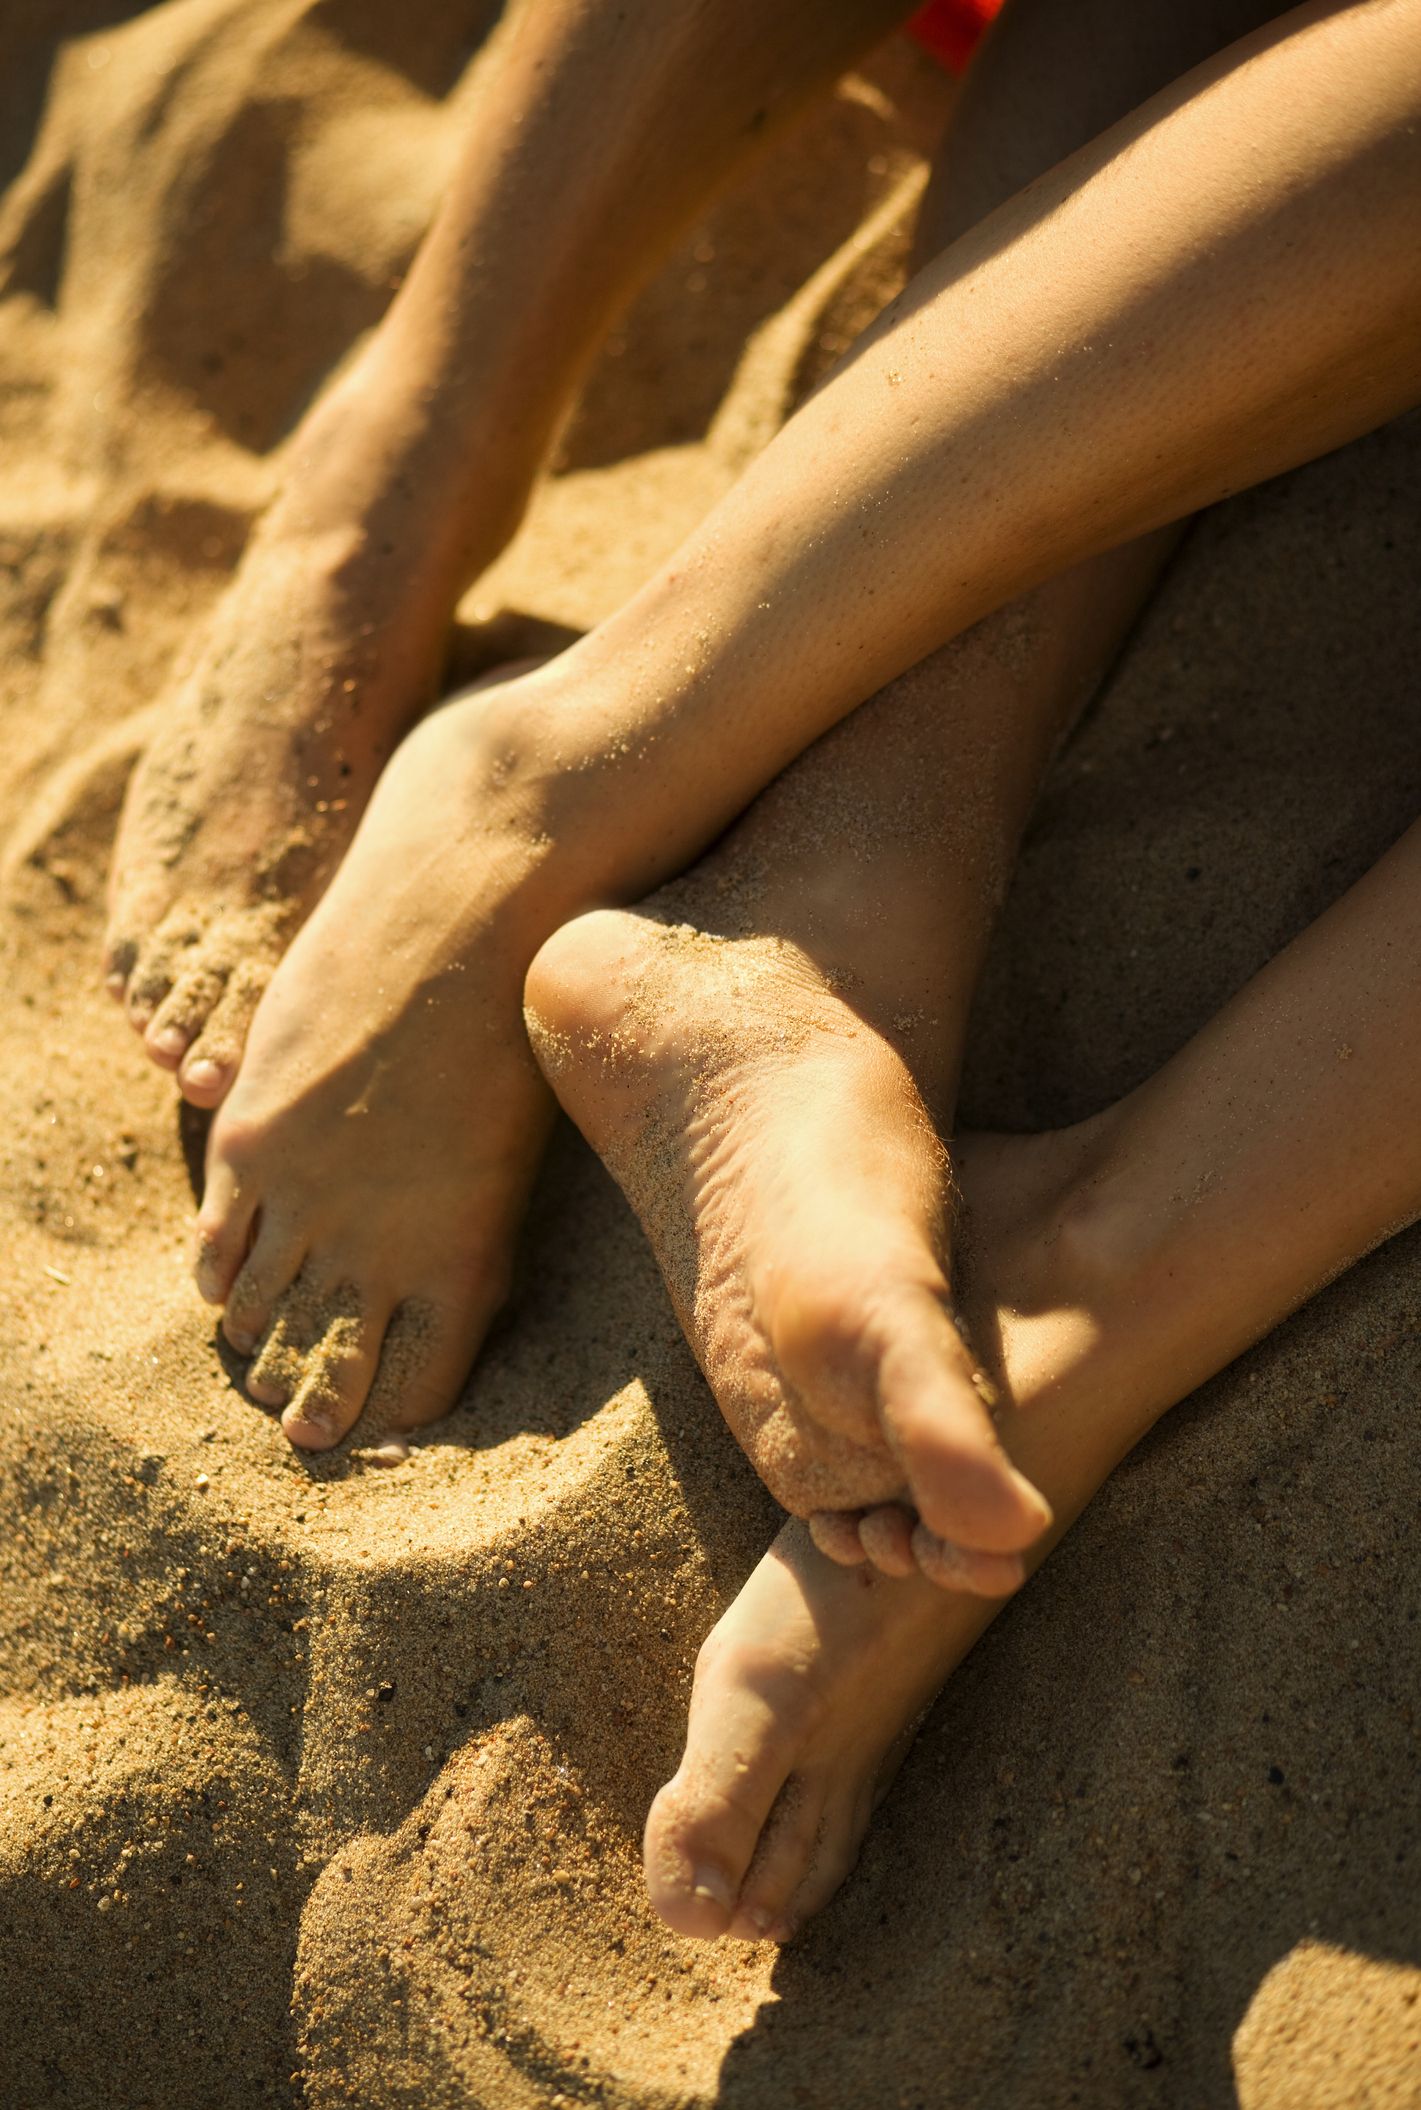 Men women making love at the beach 9 Worst Things About Having Sex On The Beach